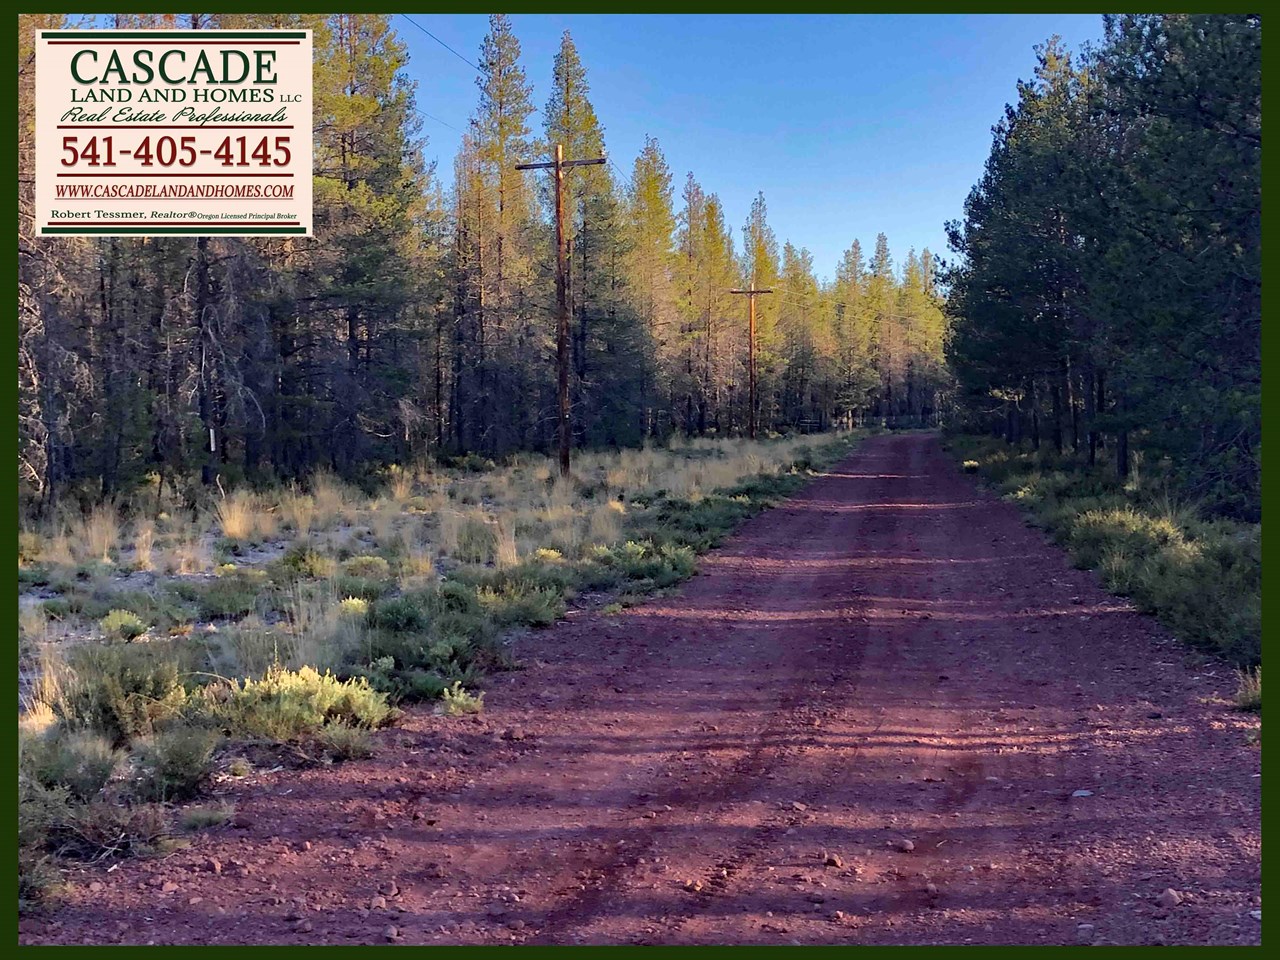 the roads are compacted gravel and cinders. the parcel is very easy to access and locate. this subdivision is centrally located just off of  hwy 97 for access to unlimited outdoor recreational opportunities! the property sits at about 4,300 ft elevation, so it does get cold in the winters, but the summers are warm and pleasant. the property would need a well and septic prior to building, but there are no time requirements to build after purchasing the property.